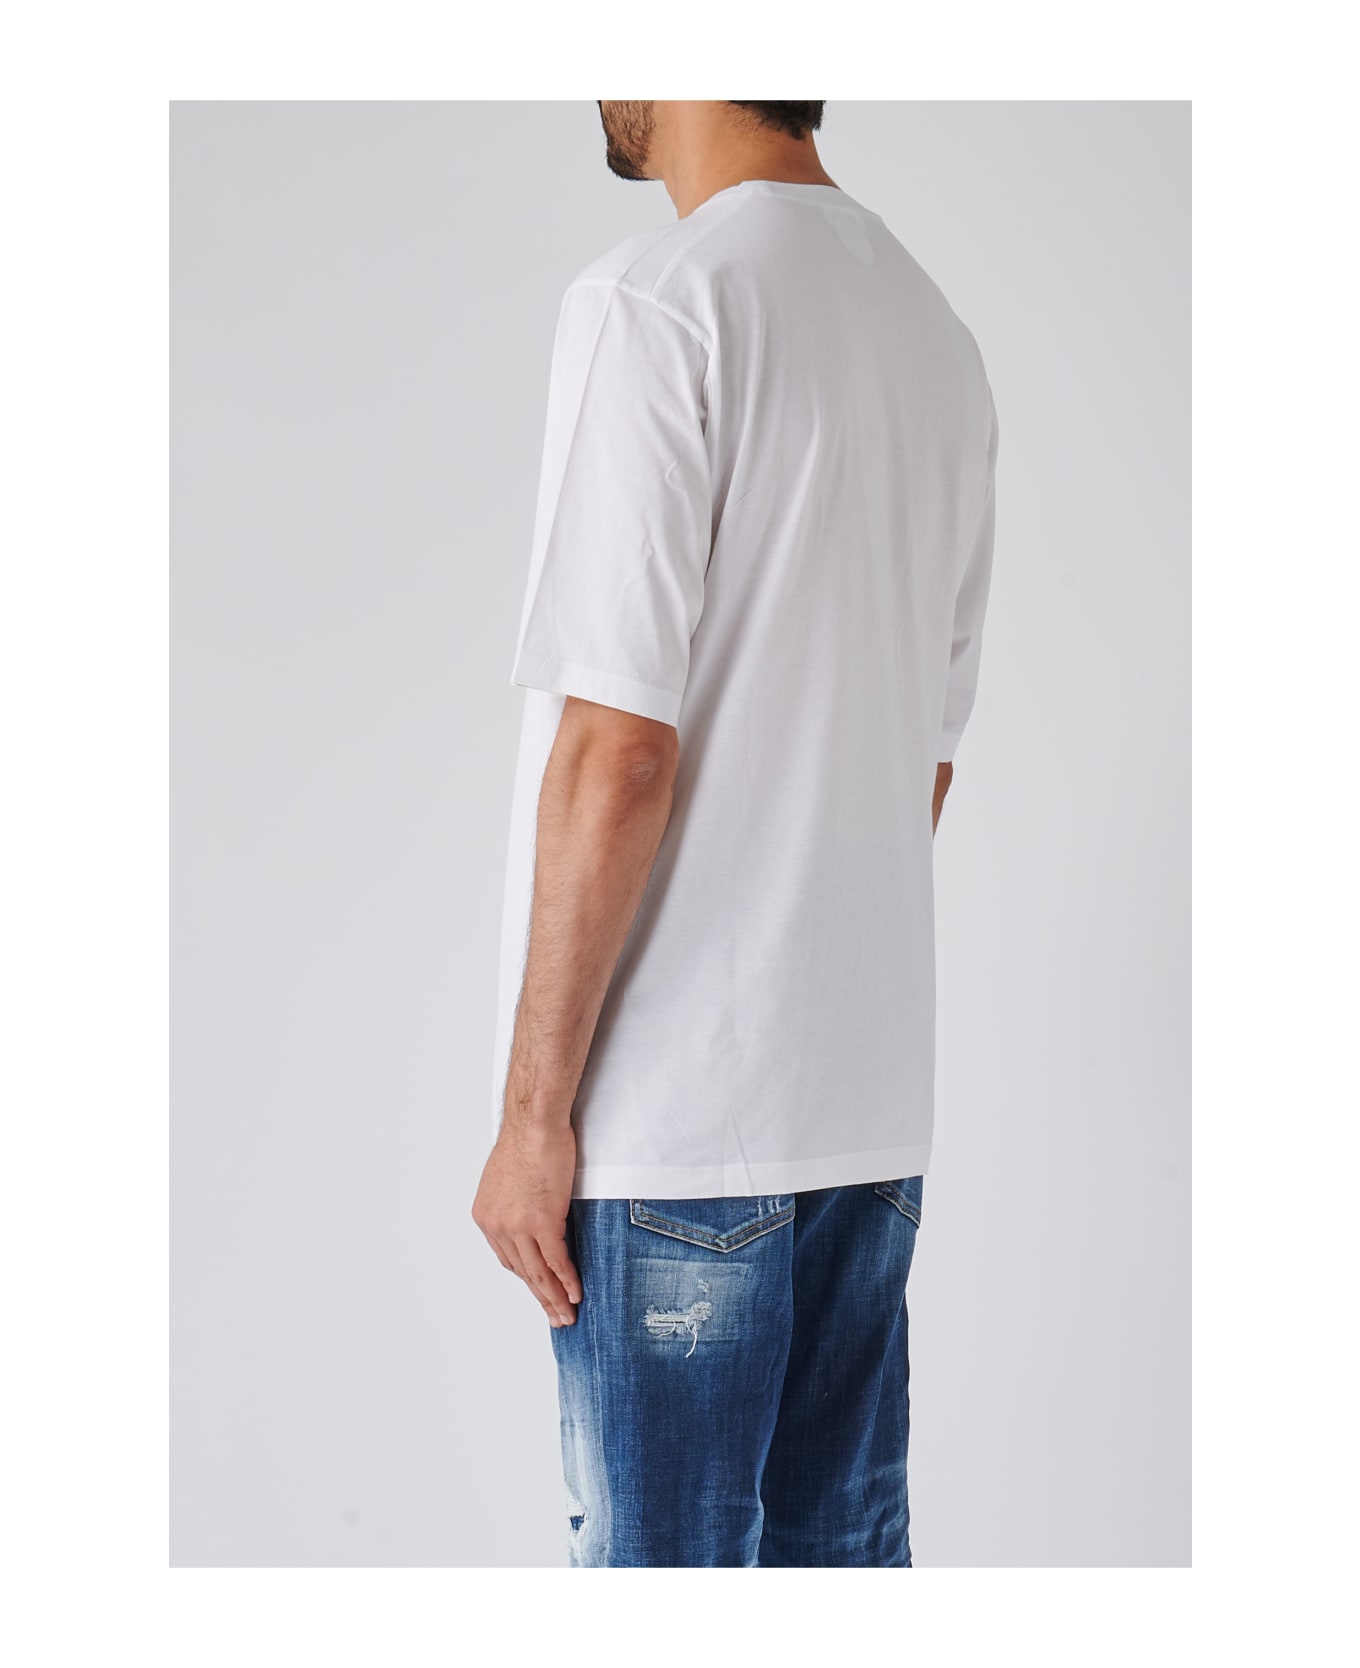 Dsquared2 Skater Fit Tee T-shirt - BIANCO シャツ